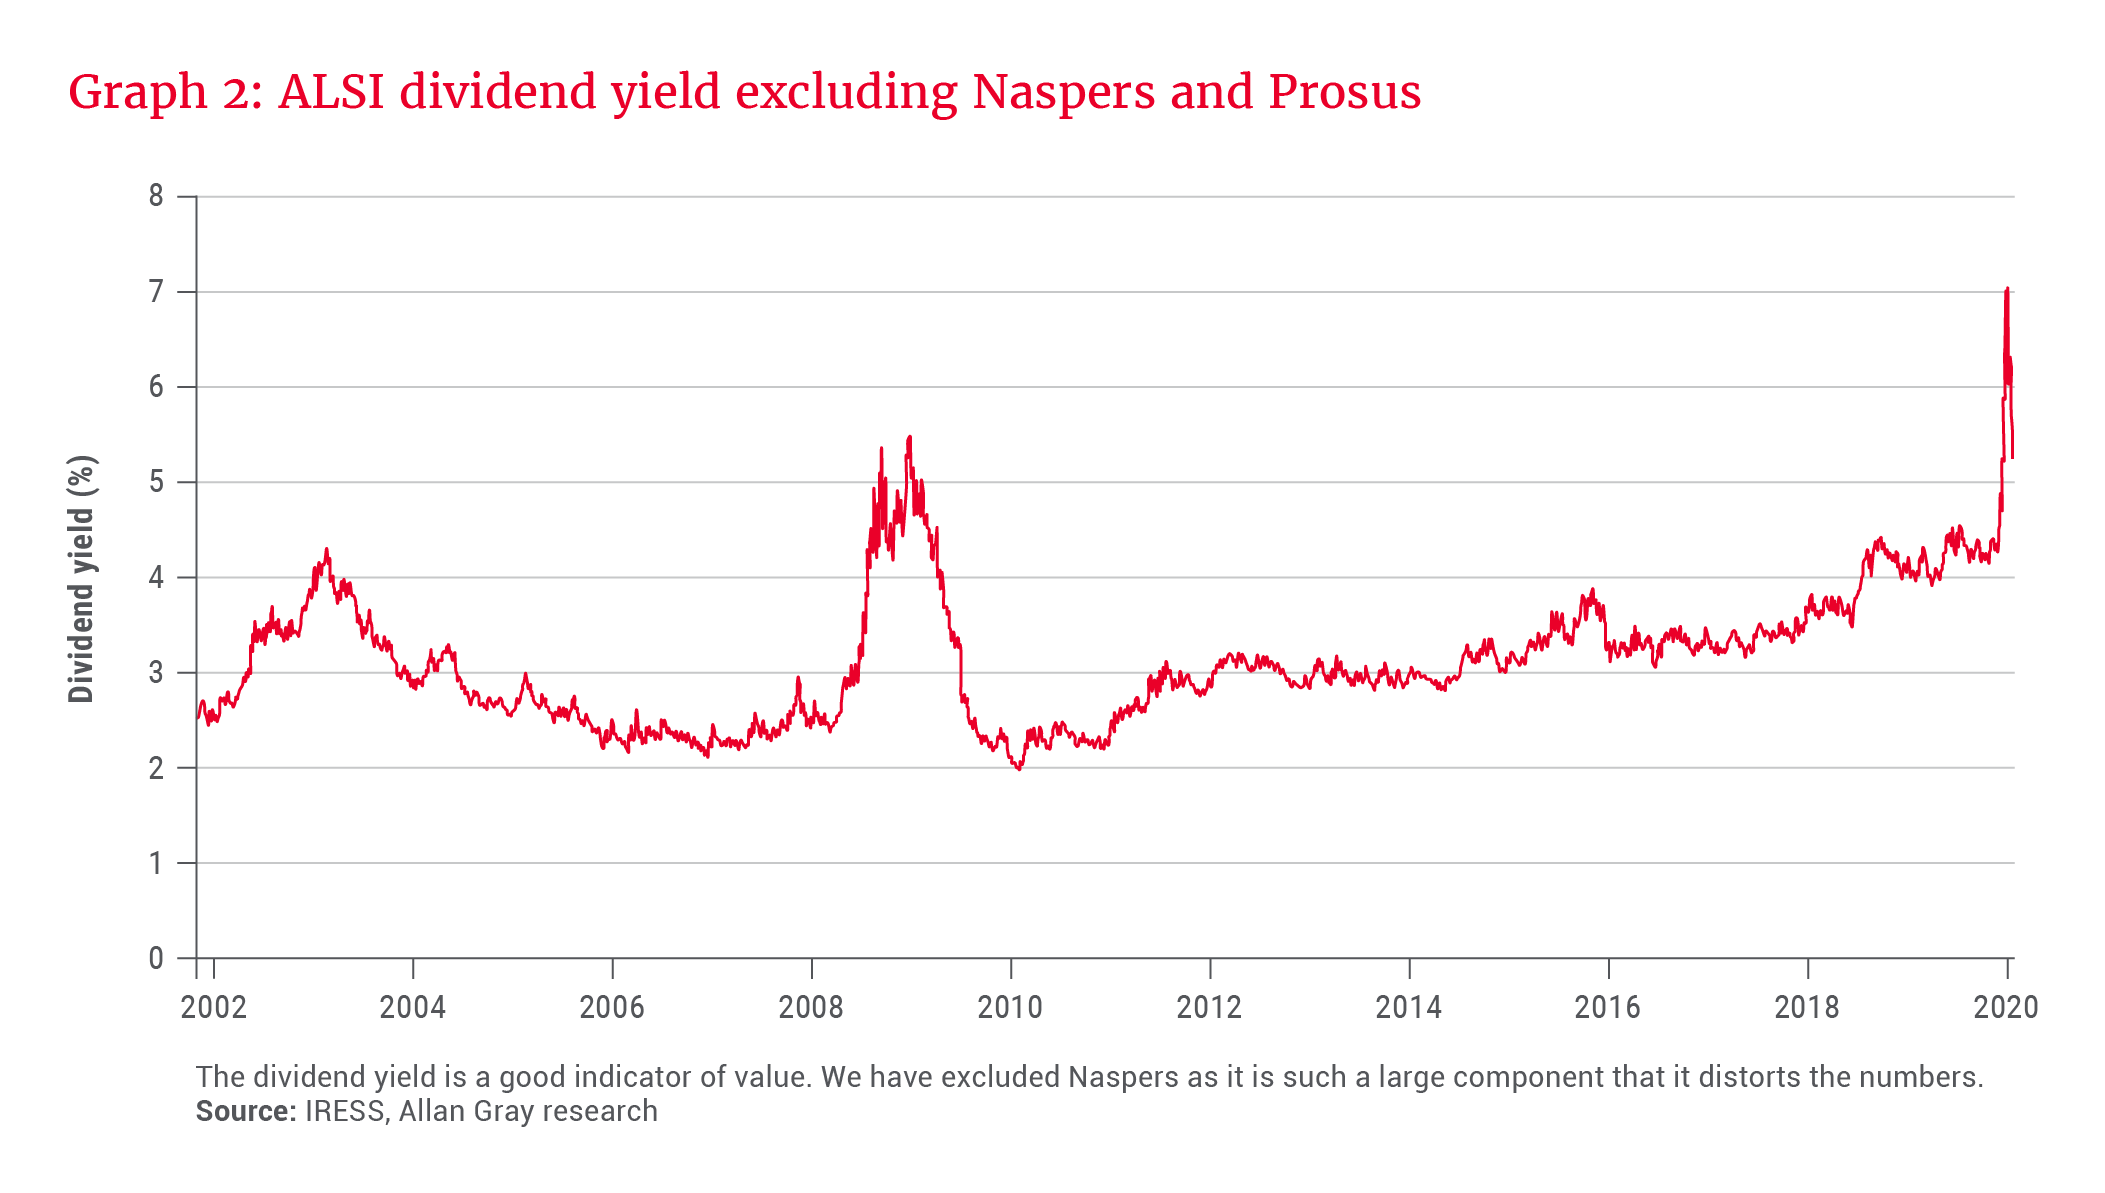 ALSI dividend yield excluding Naspers and Prosus - Allan Gray